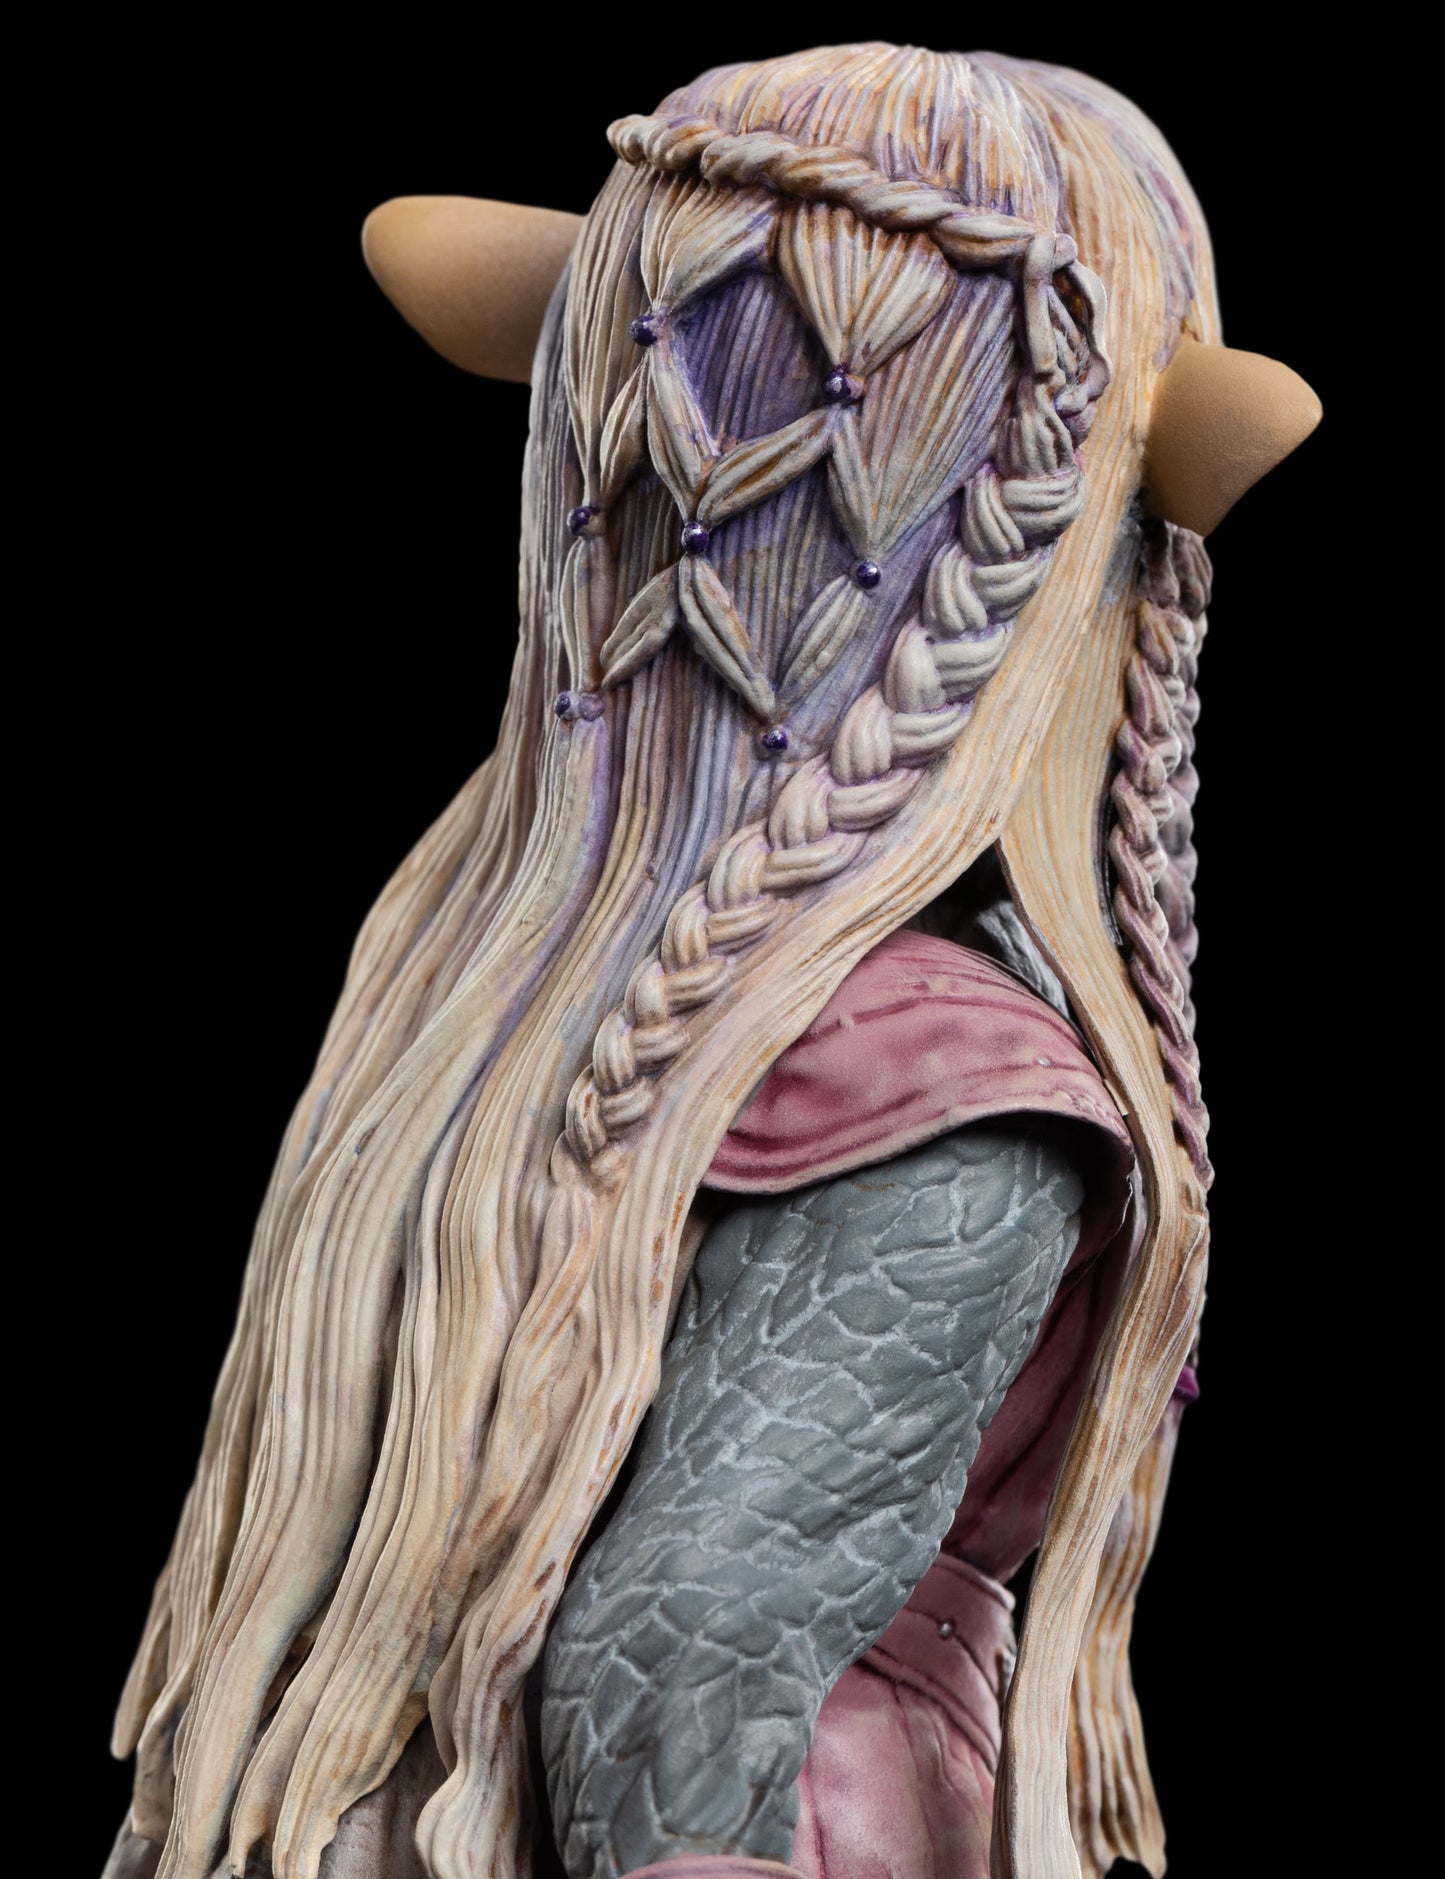 Brea The Gelfling (The Dark Crystal: Age of Resistance) 1:6 Scale Statue